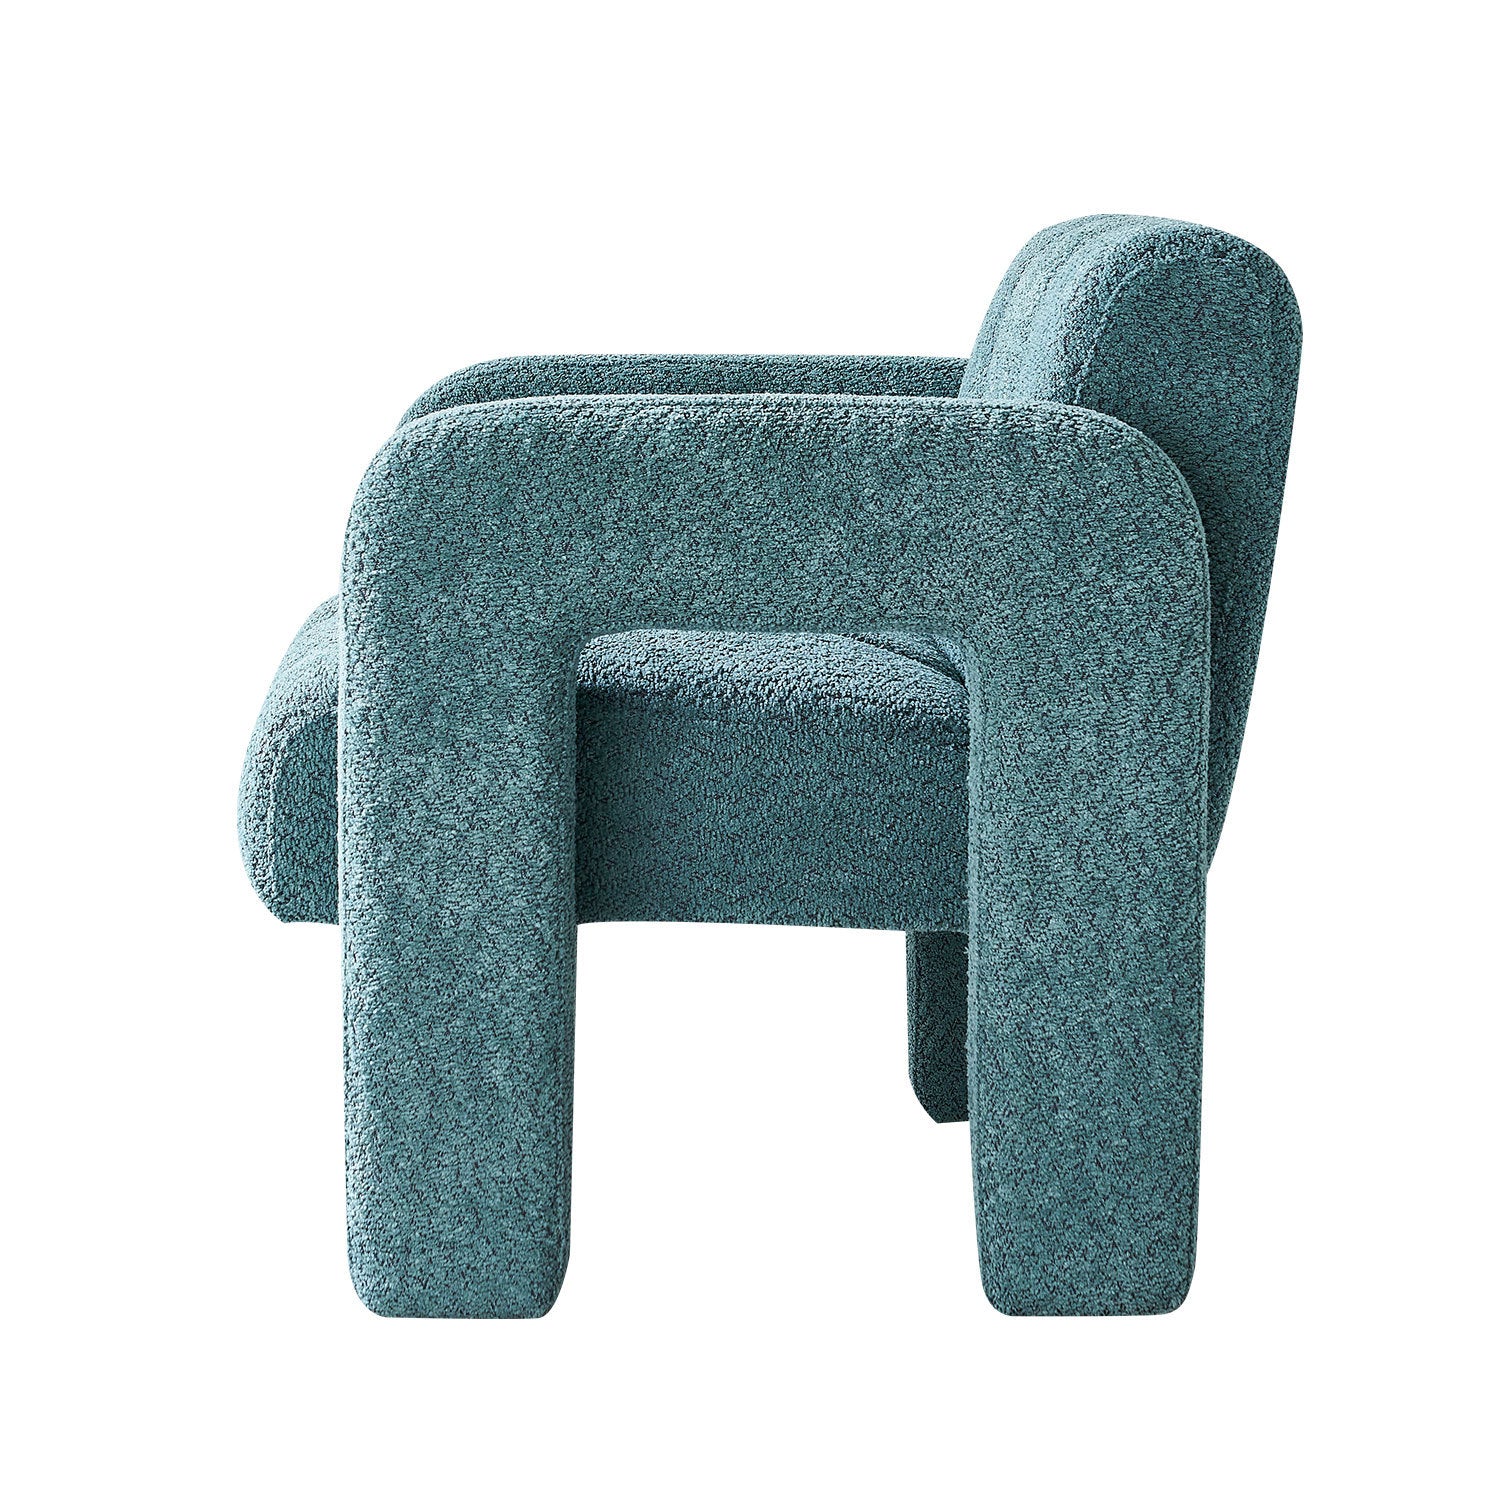 31.10" Wide Boucle Upholstered Accent Chair green-primary living space-modern-fiber foam and